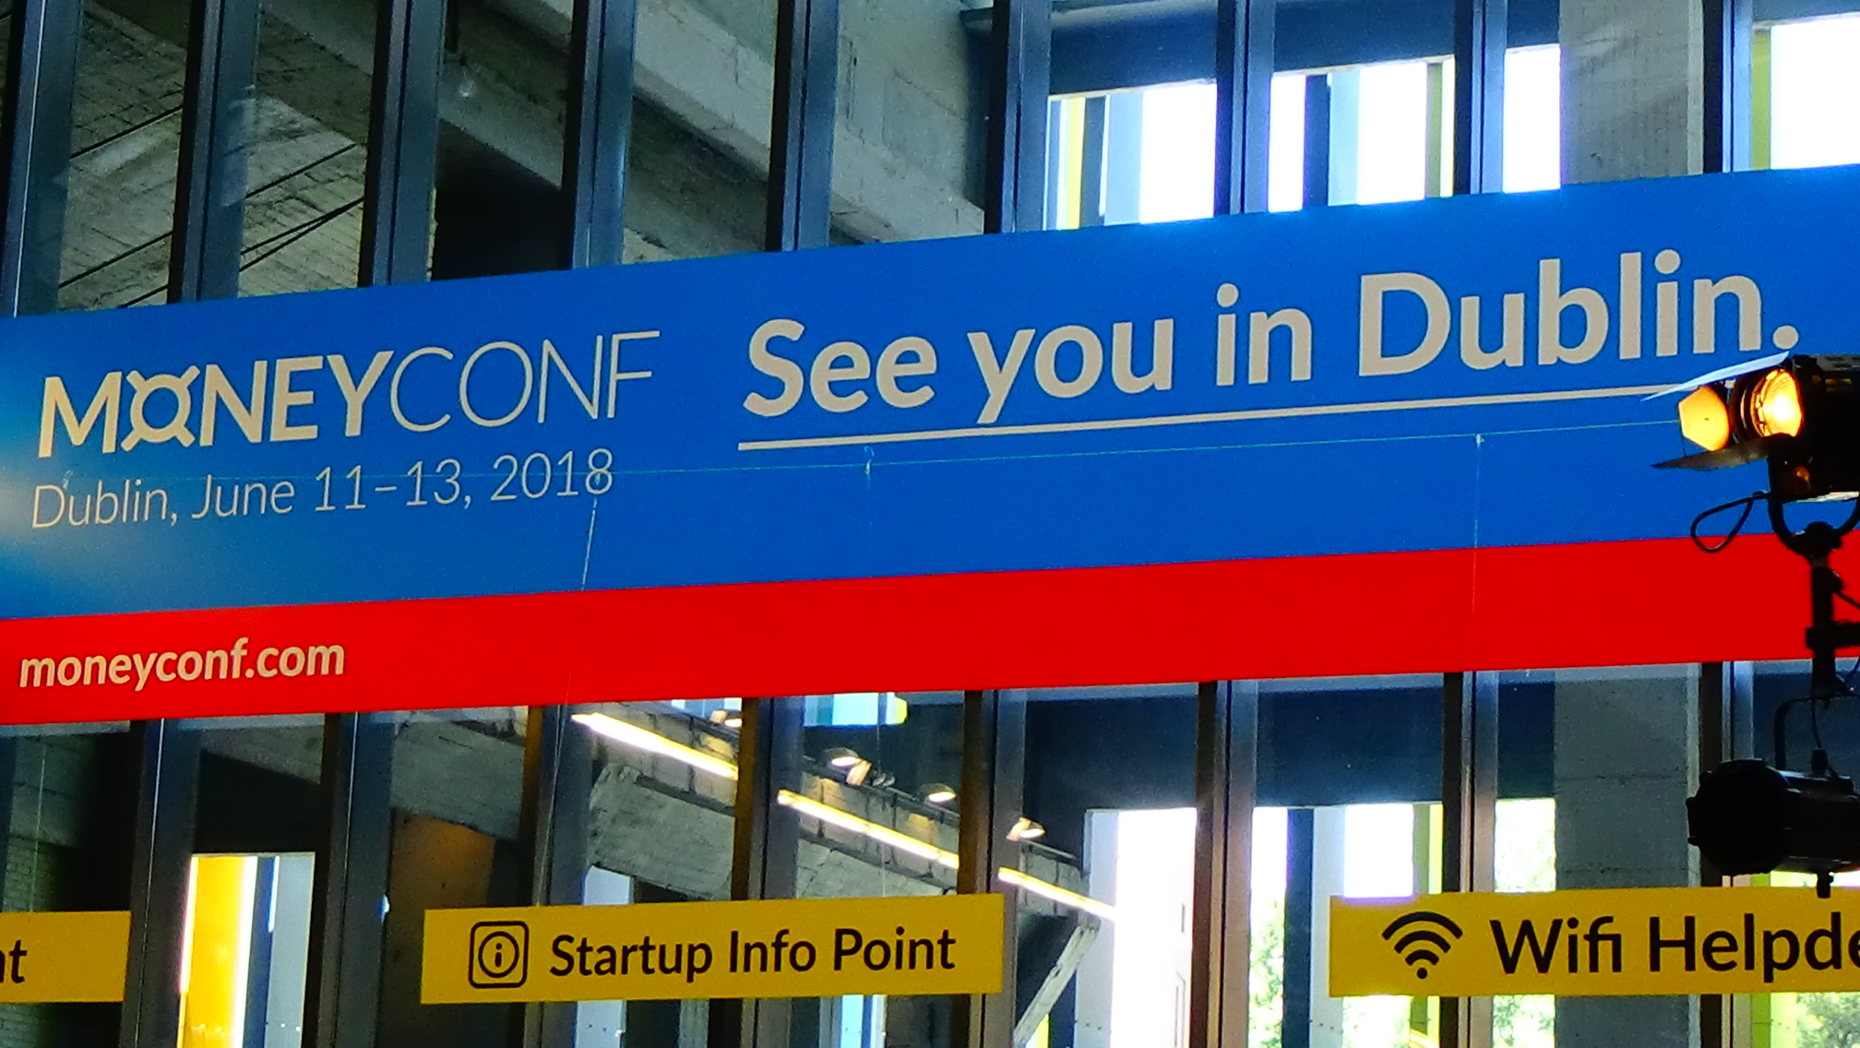 MoneyConf moves to Dublin in 2018